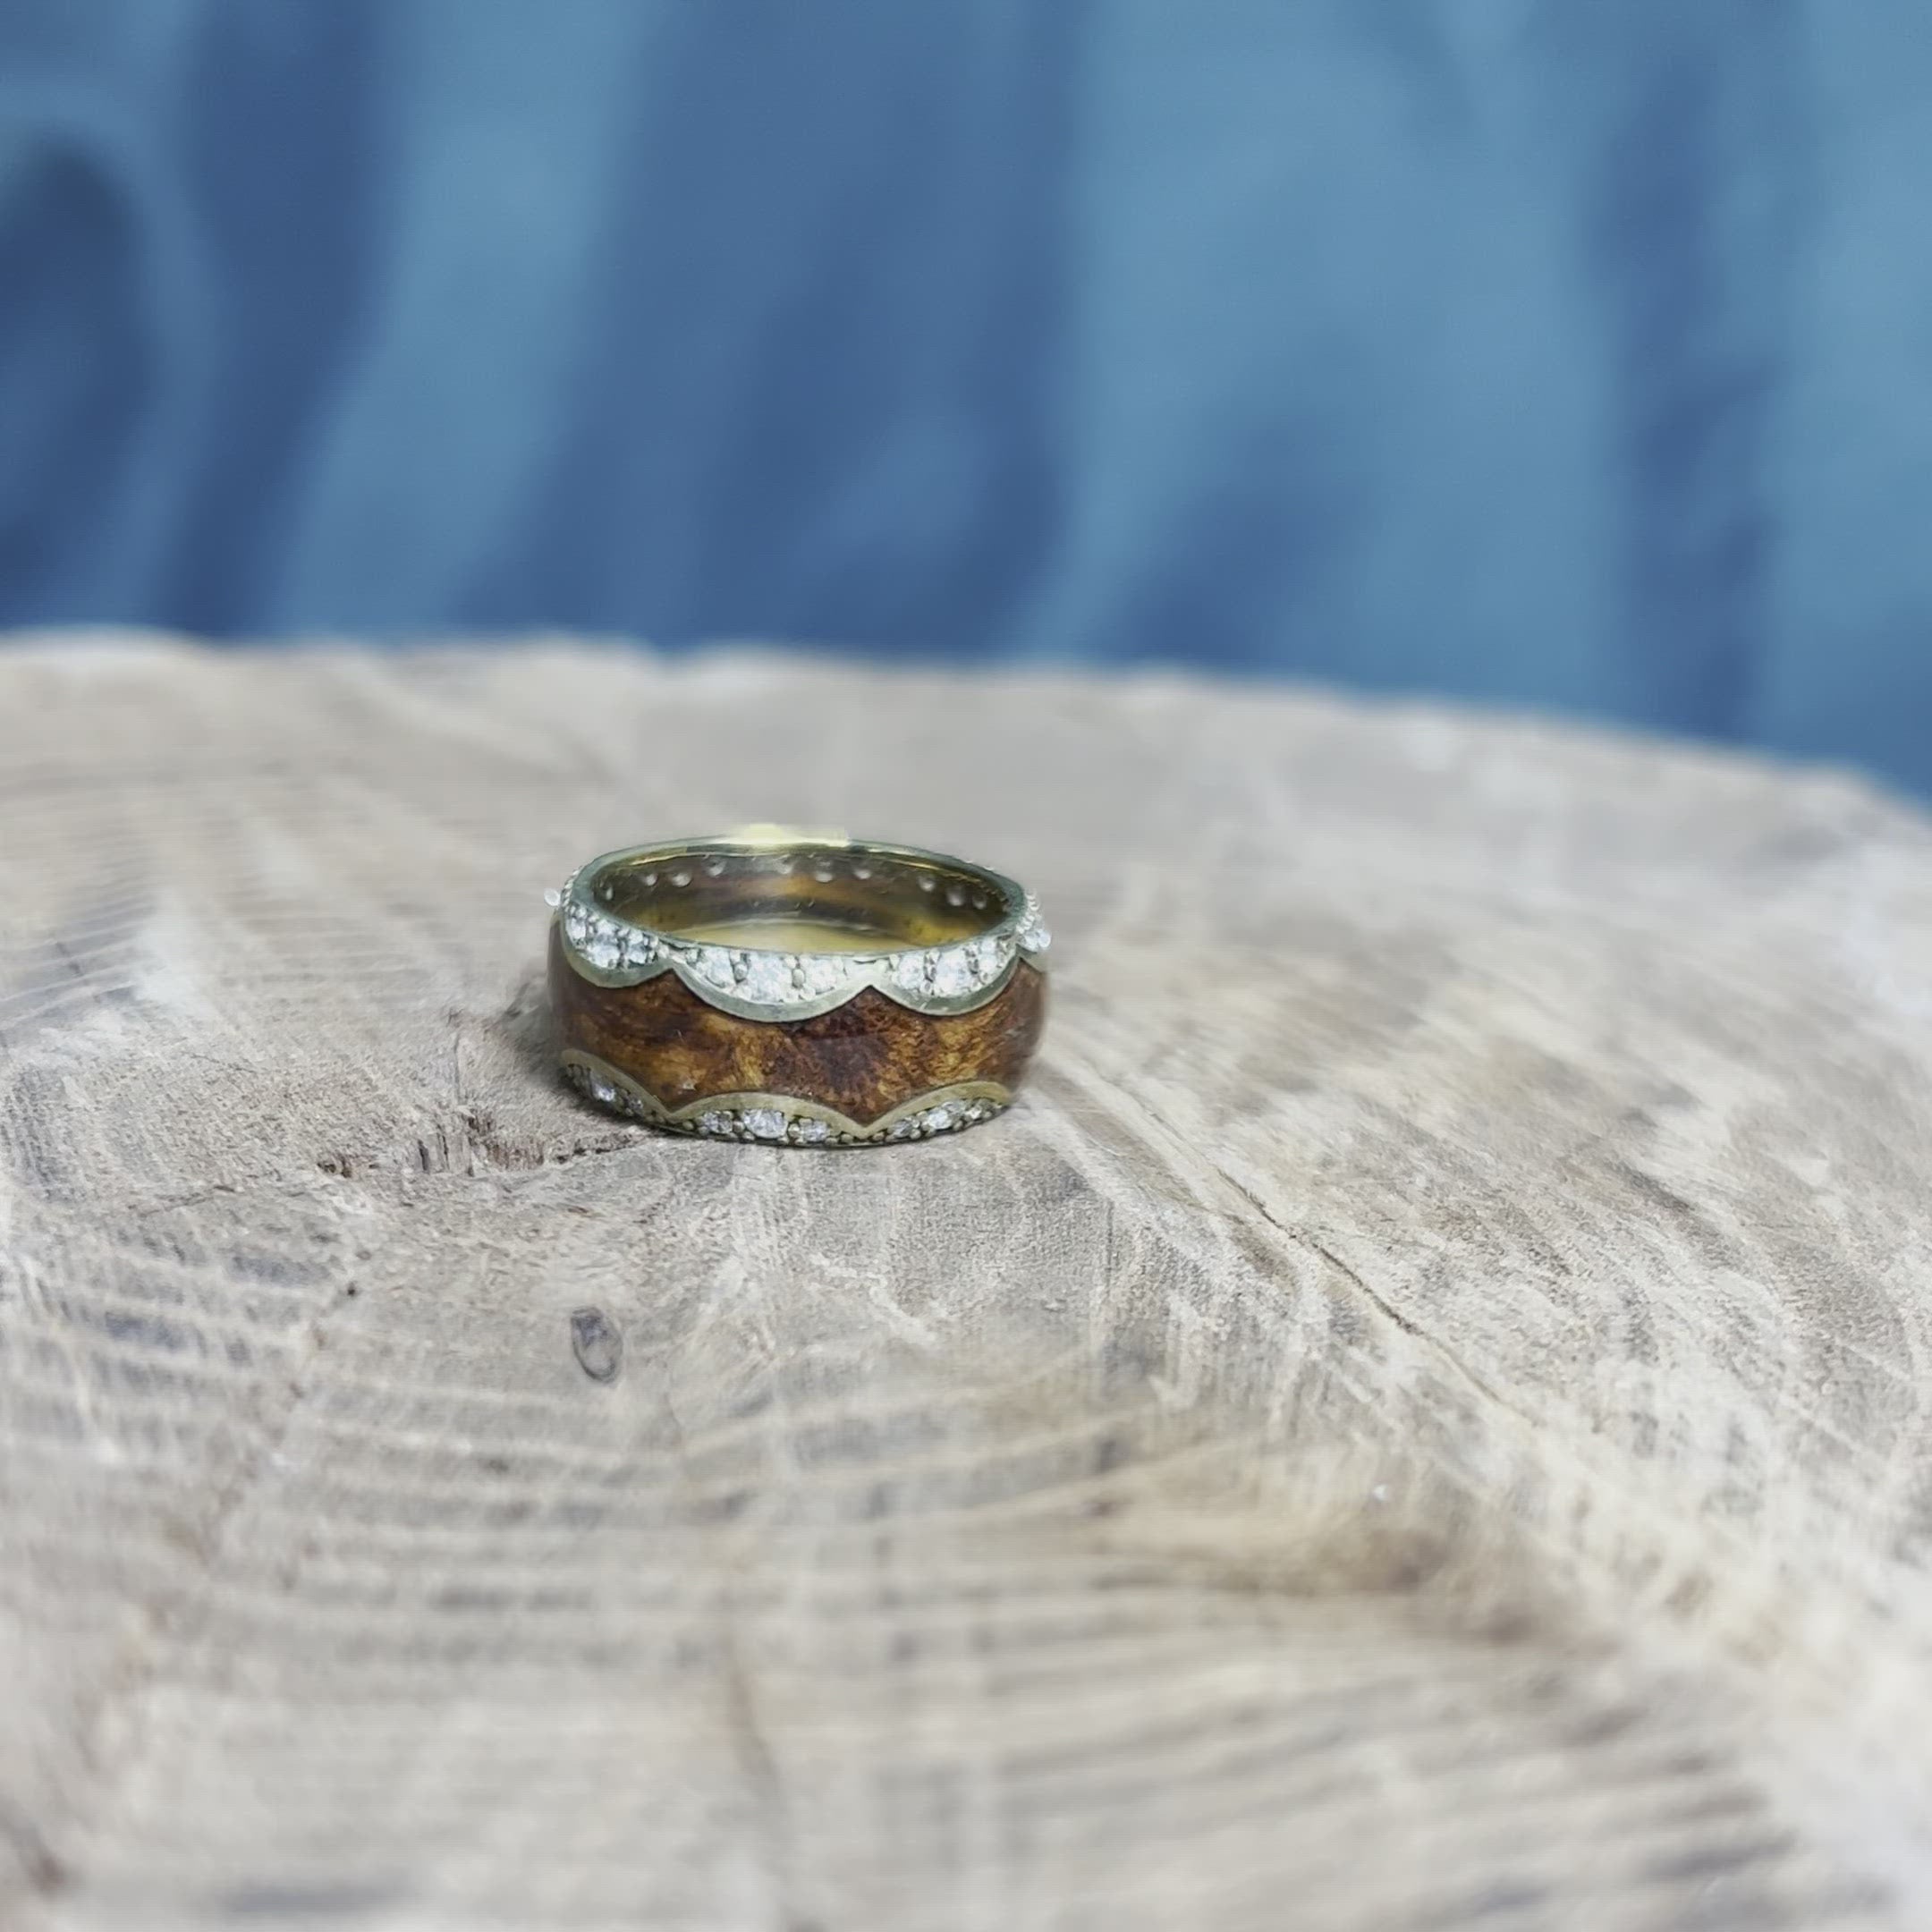 Unique Diamond Wedding Band, Gold Ring With Mesquite Burl Wood